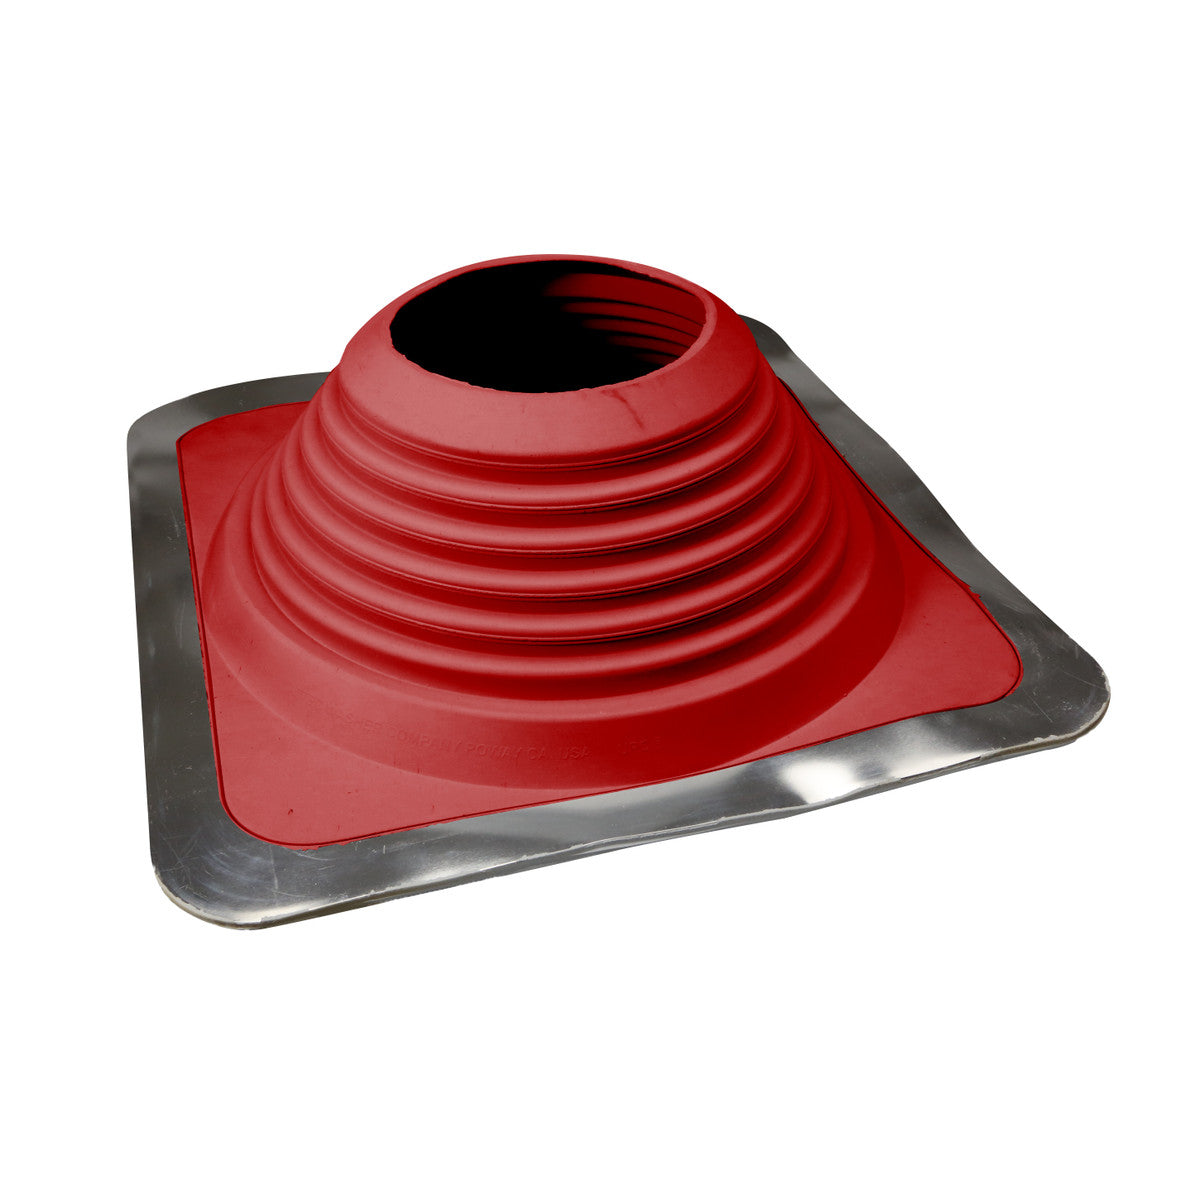 #9 Roofjack Square EPDM Pipe Flashing Boot, Bright Red